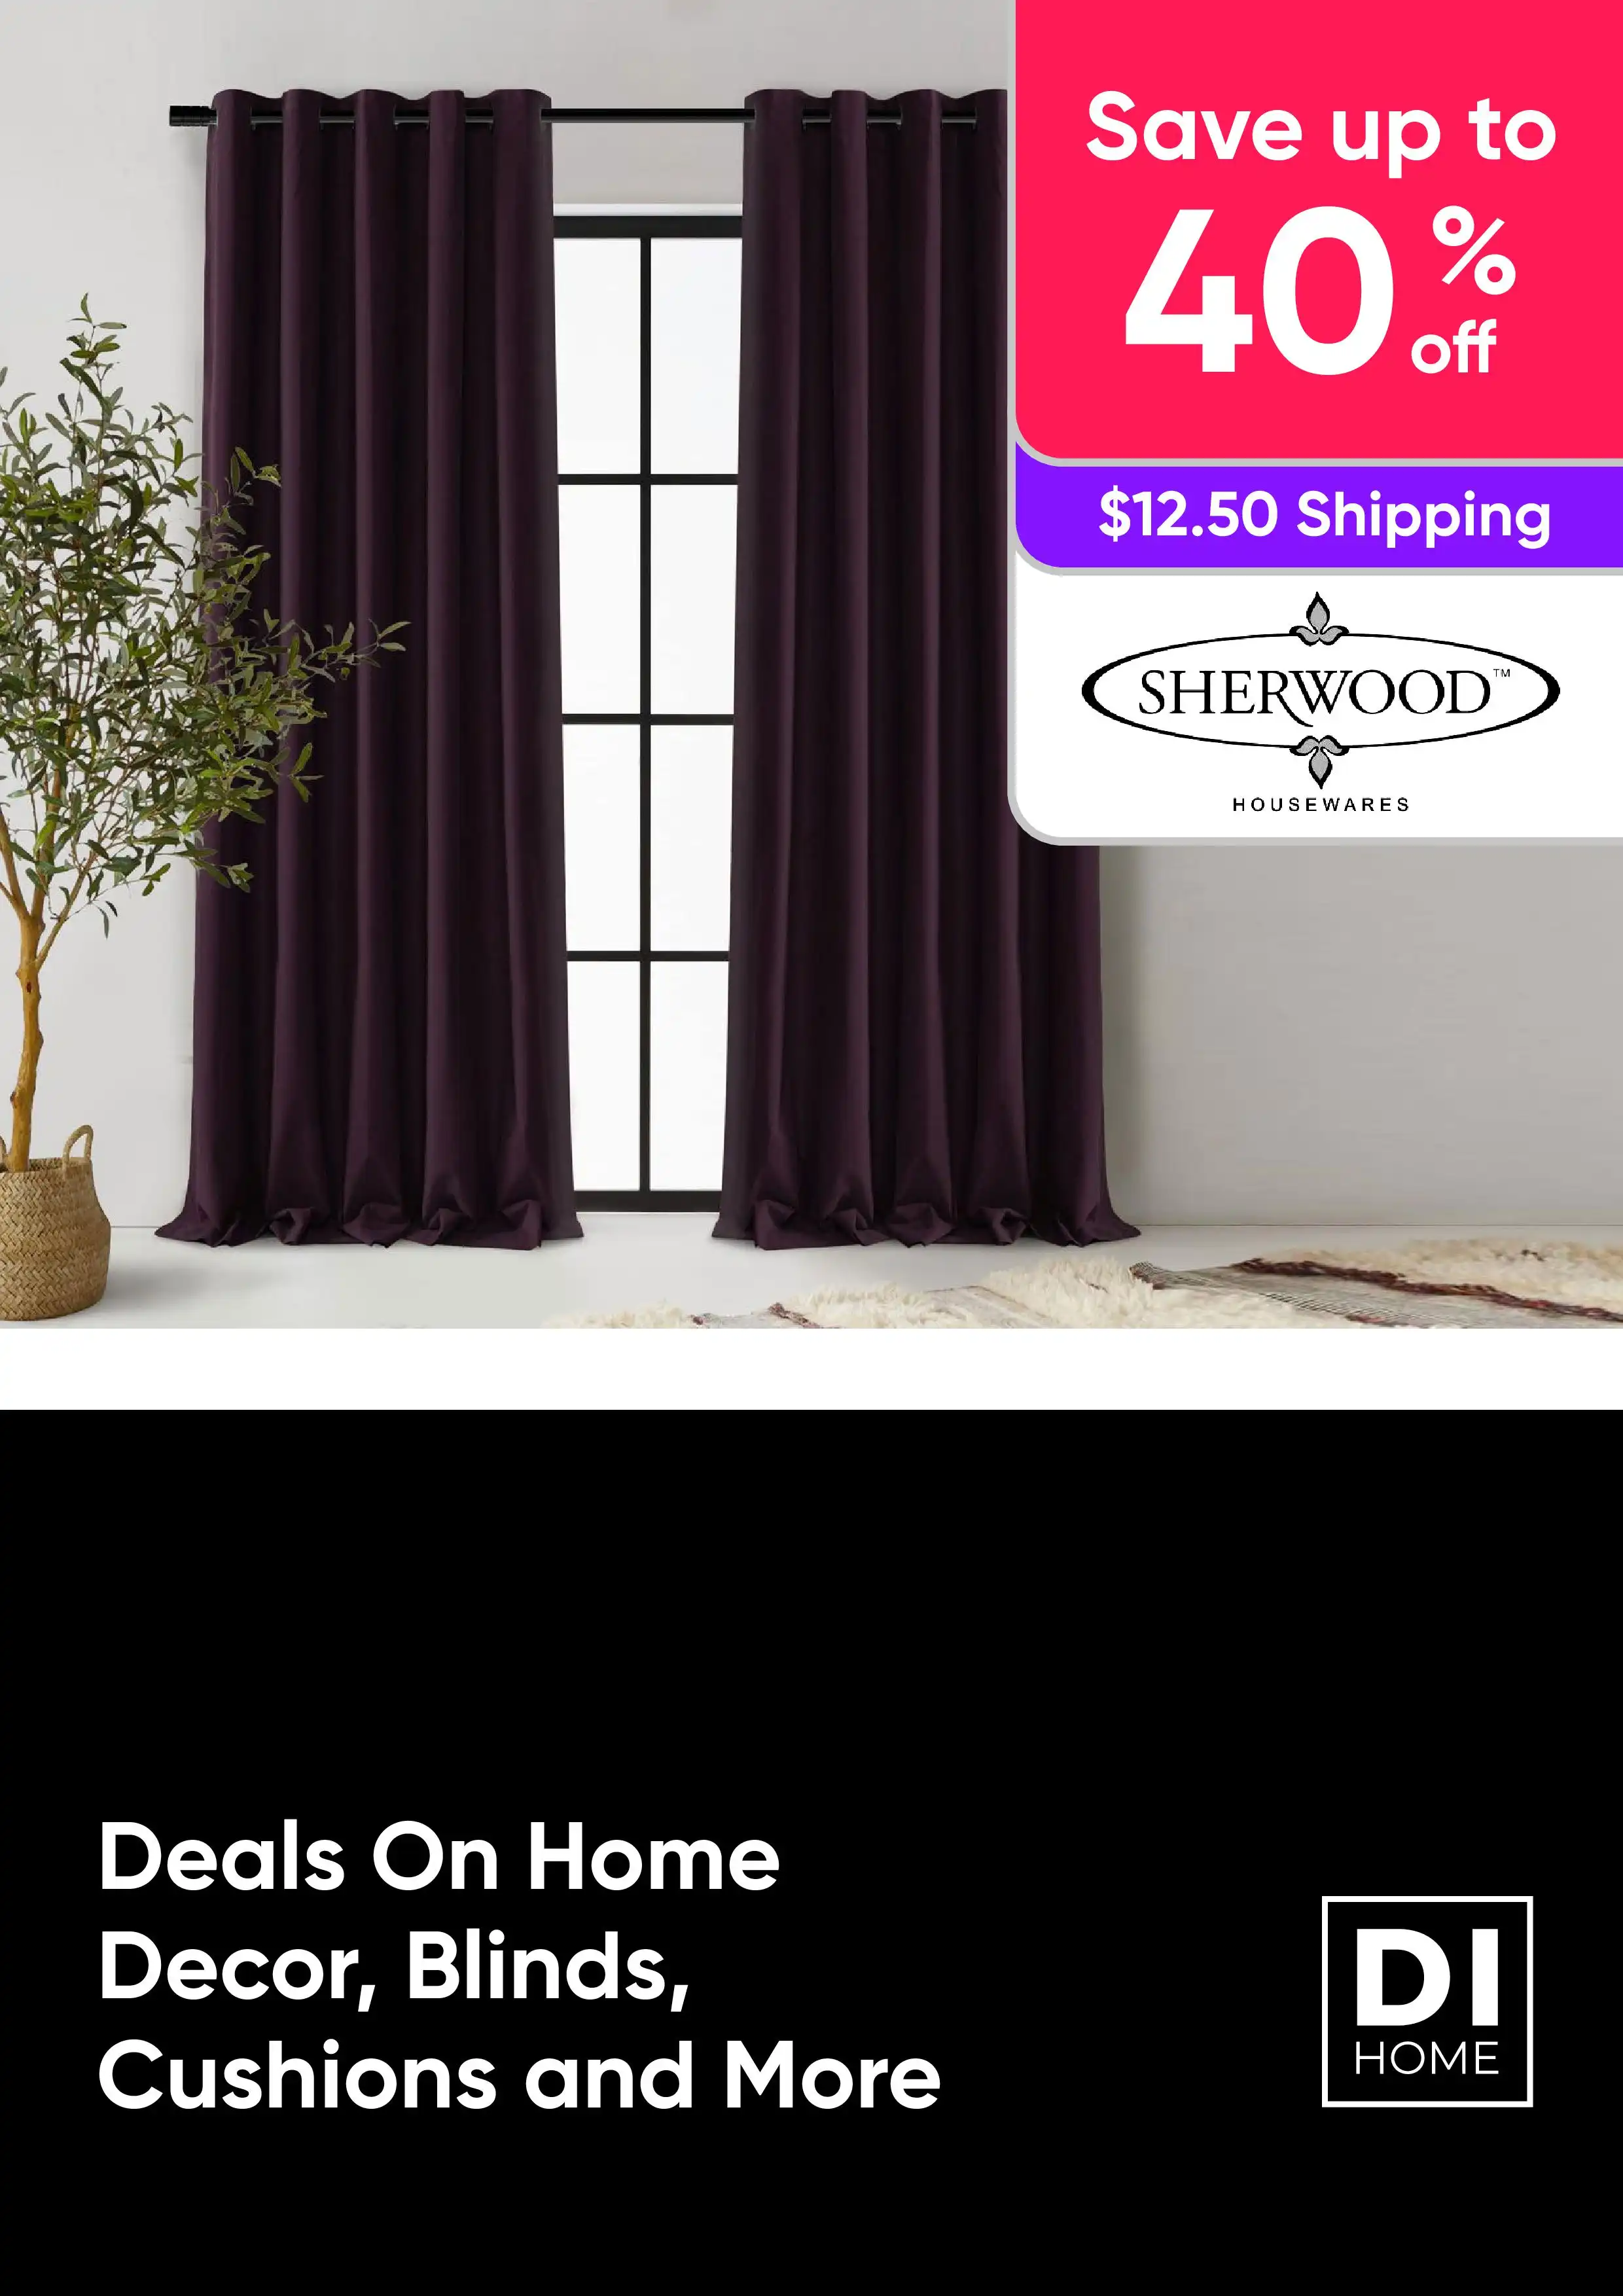 Deals On Home Decor, Blinds, Cushions and More - Save up to 40% off